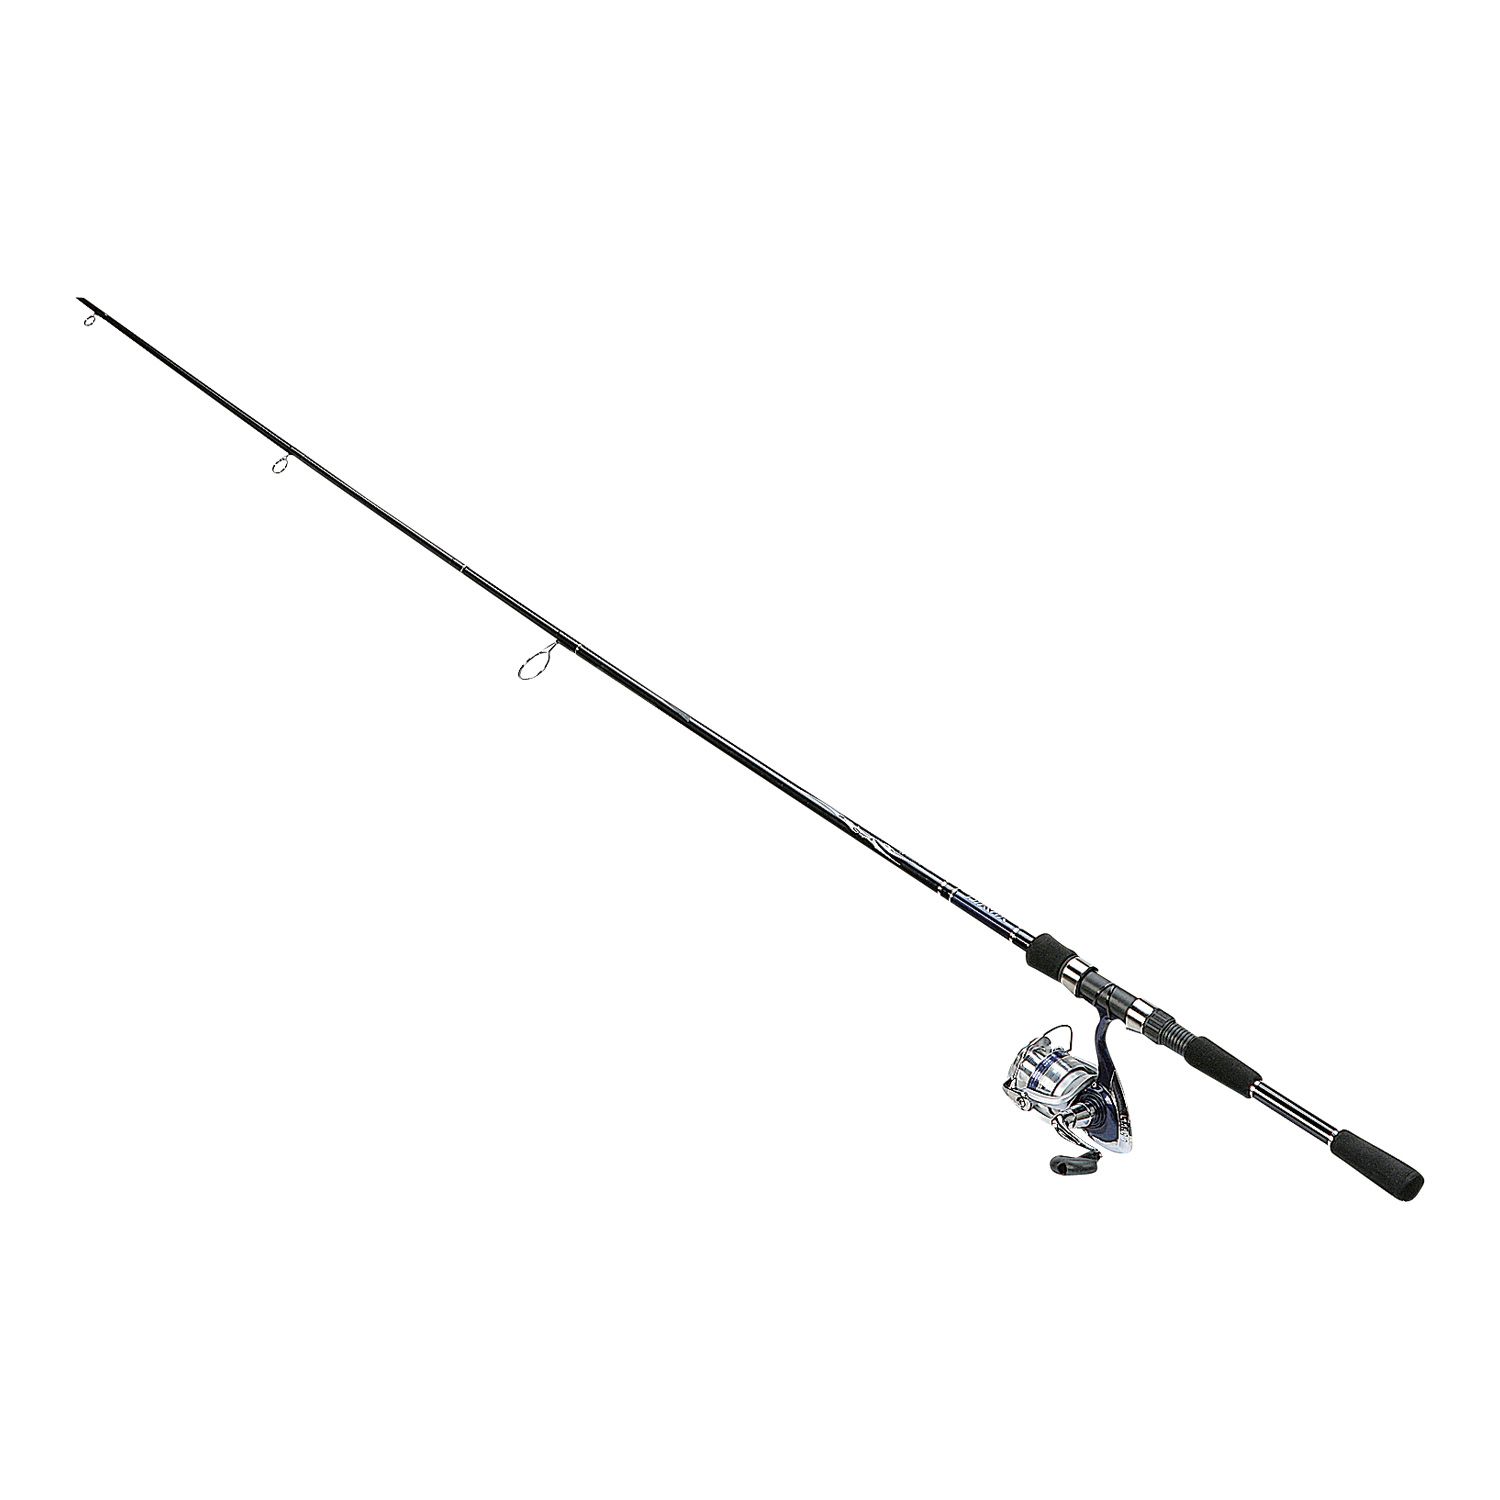 Fly Fishing Pole Clipart | Clipart Panda - Free Clipart Images